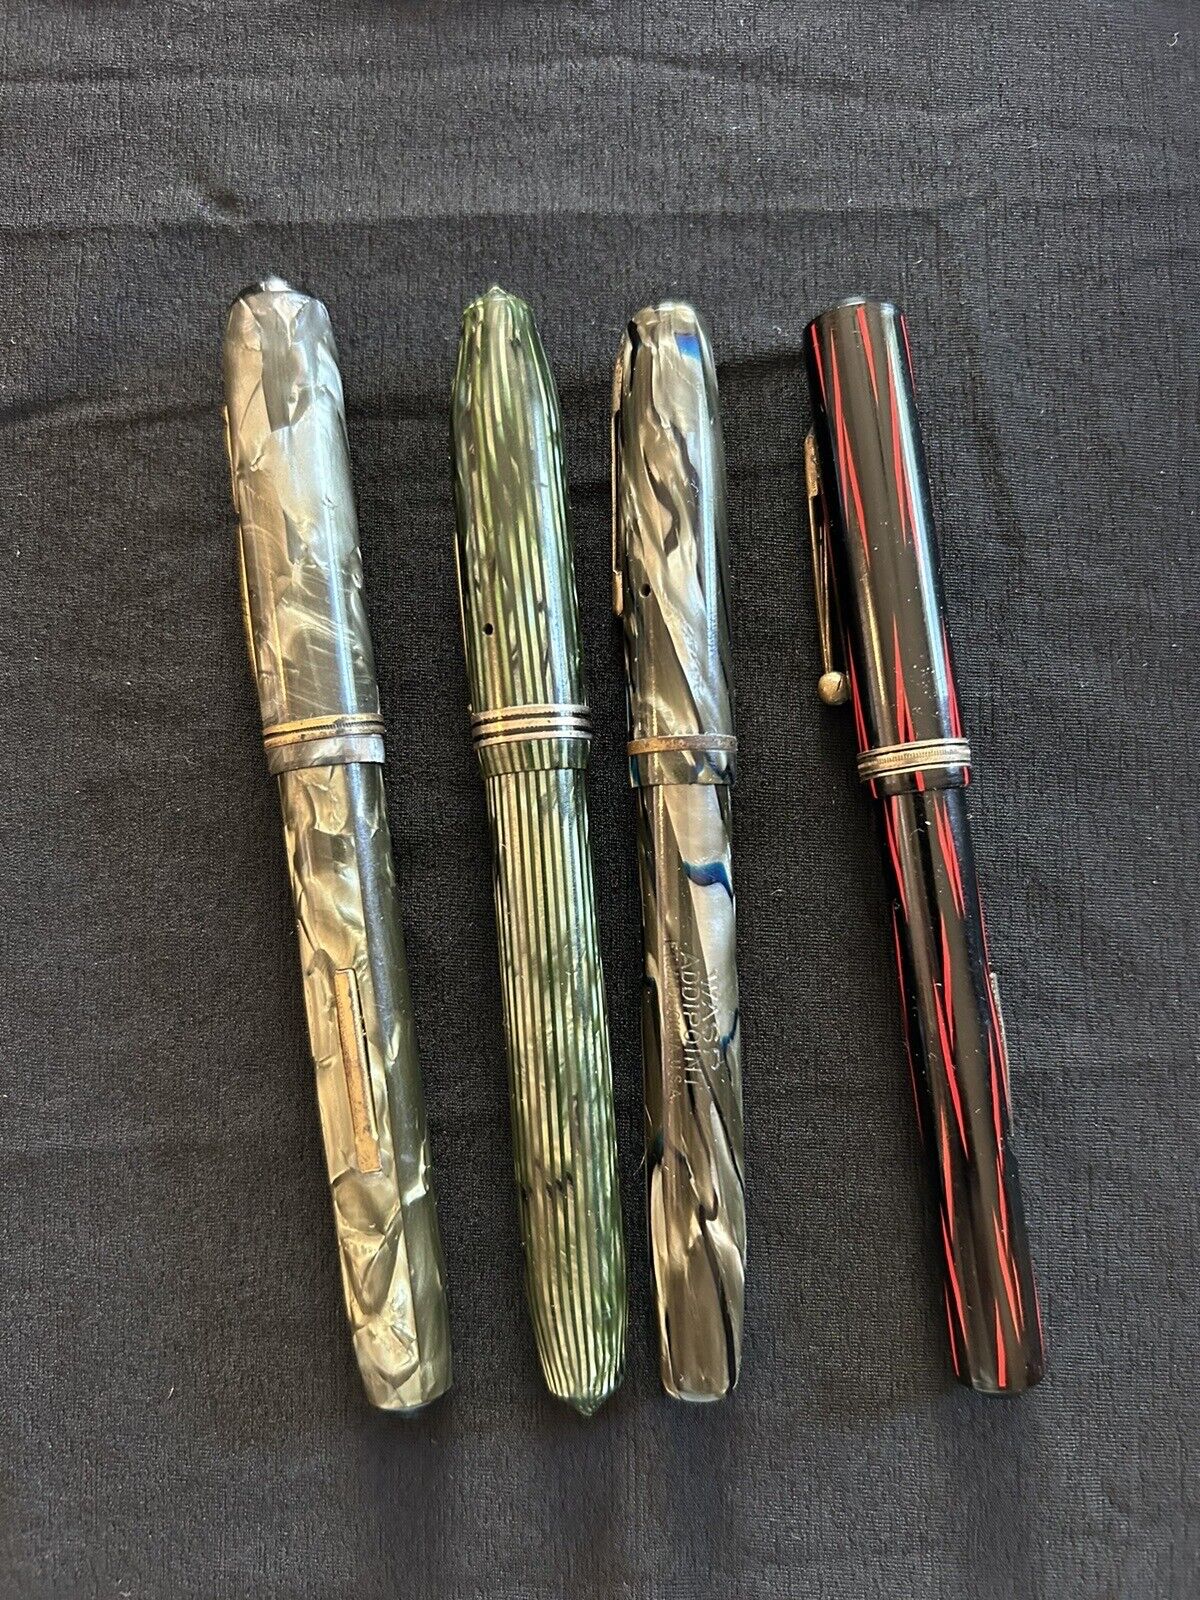 NICE  Lot of 4 Vintage Fountain Pens